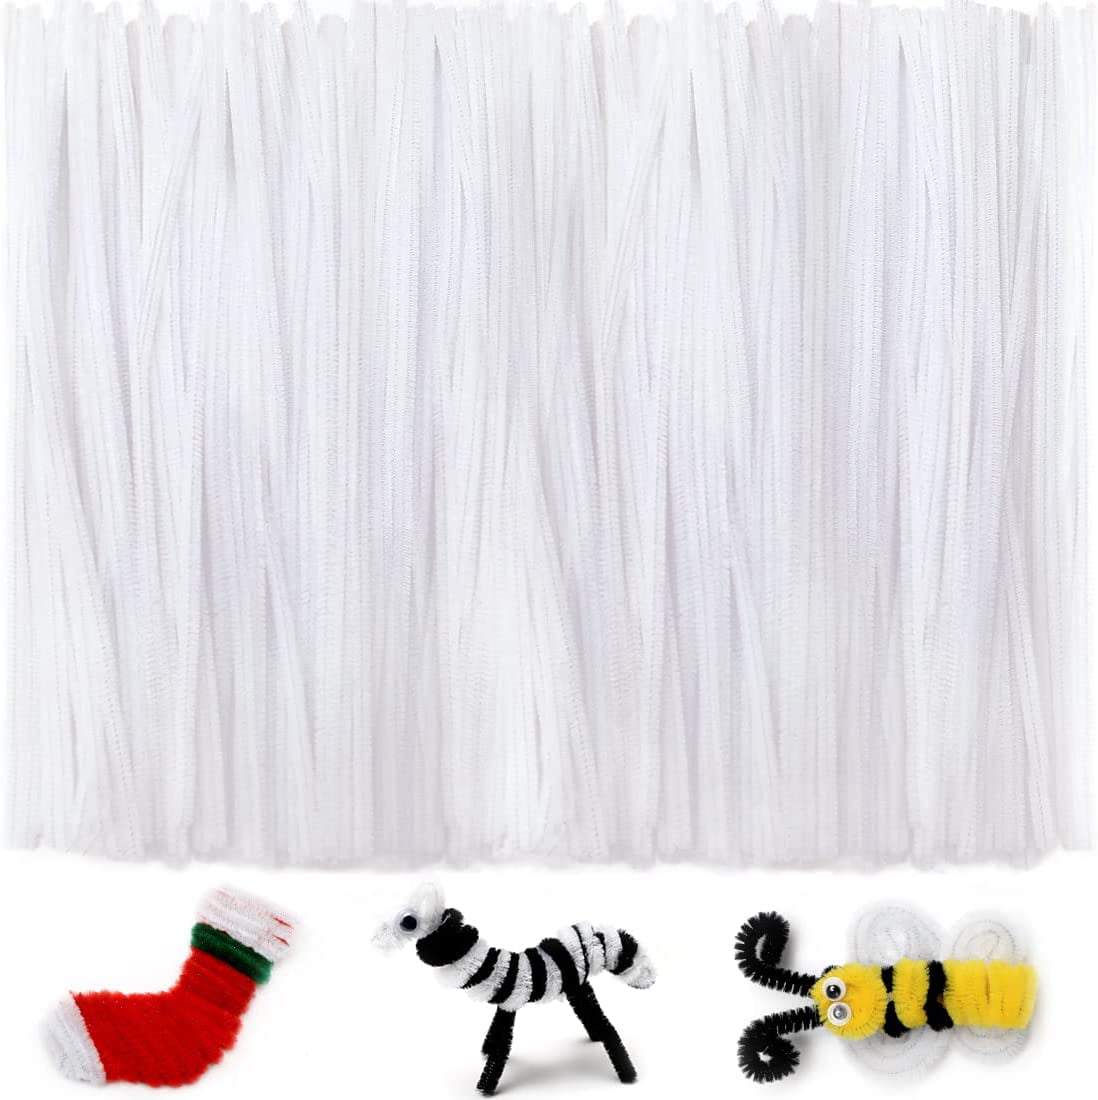 TOCOLES Pipe Cleaners Craft Supplies - 300pcs White Pipe Cleaners Chenille Stems for Craft Kids DIY Art Supplies (6 mm x 12 inch)